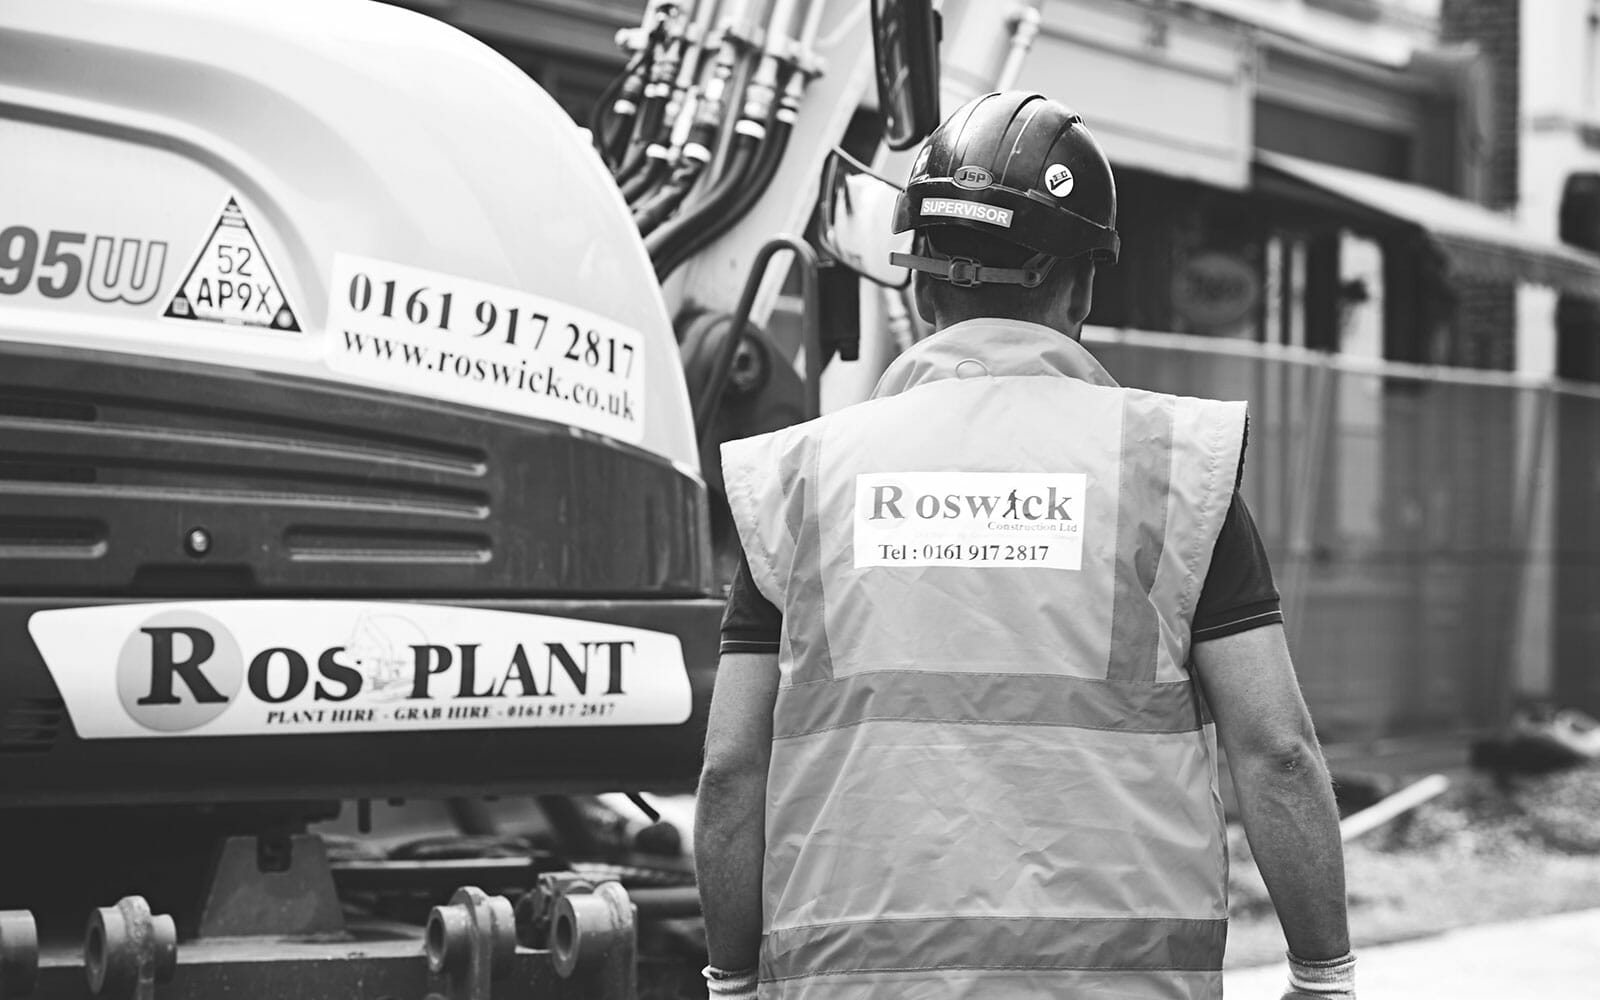 Drainage Services in Northern Ireland, UK and Ireland by ROswick Ltd